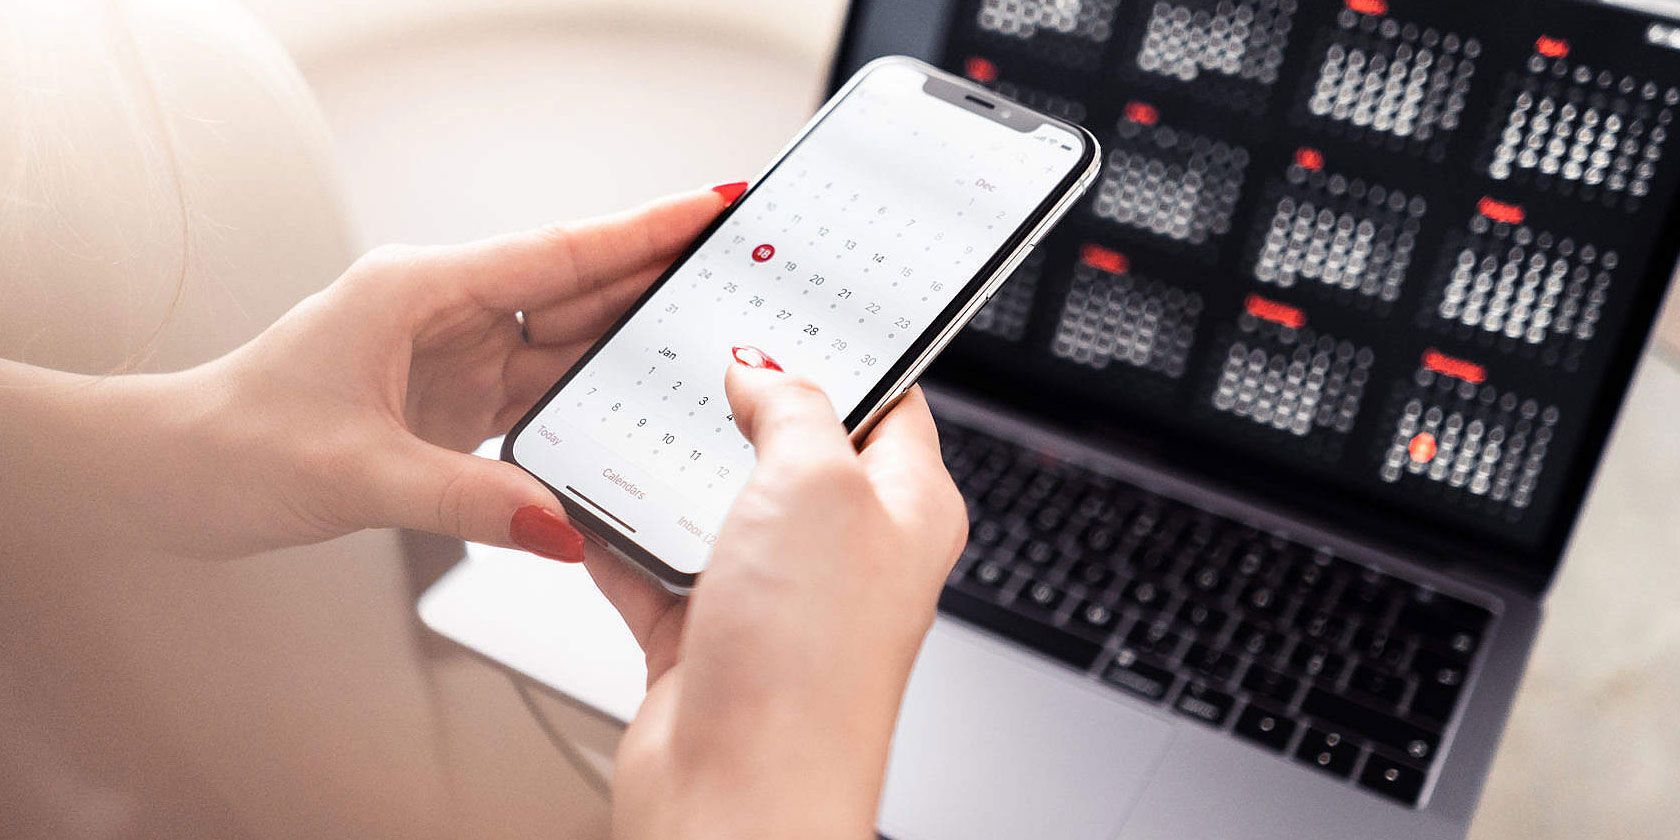 How to Sync Google Calendar With Your iPhone